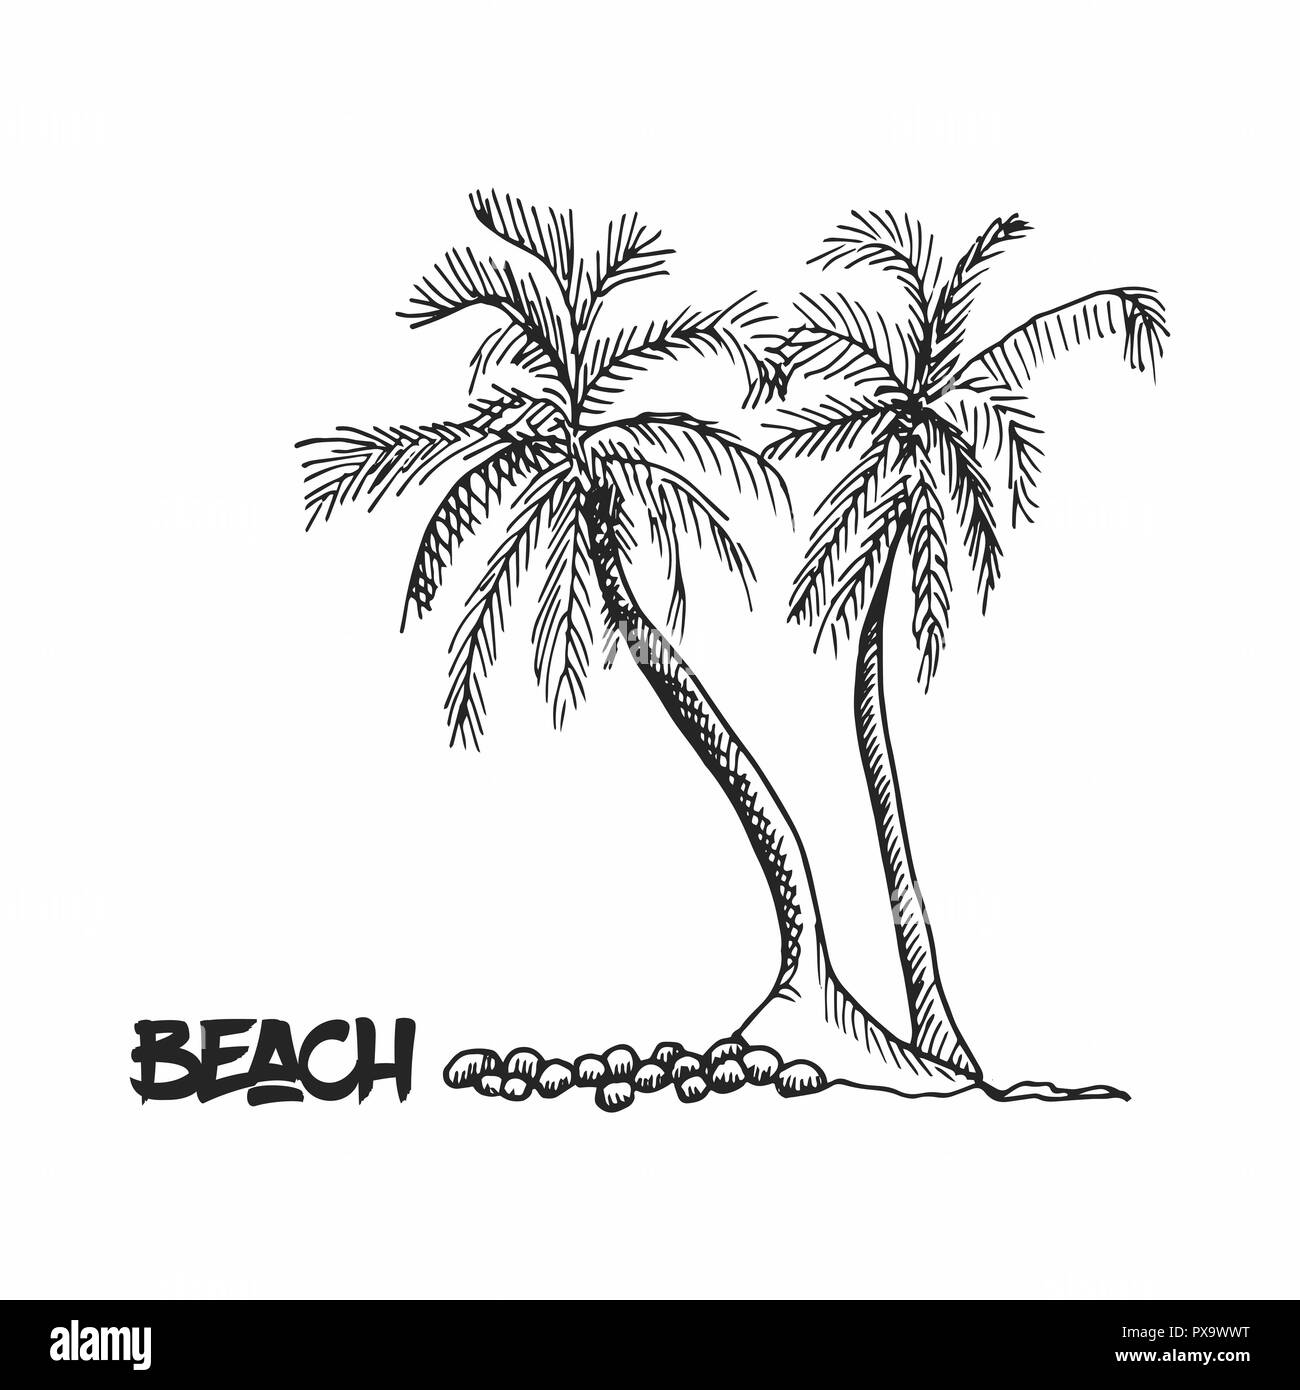 How to draw PALM OIL TREE - YouTube